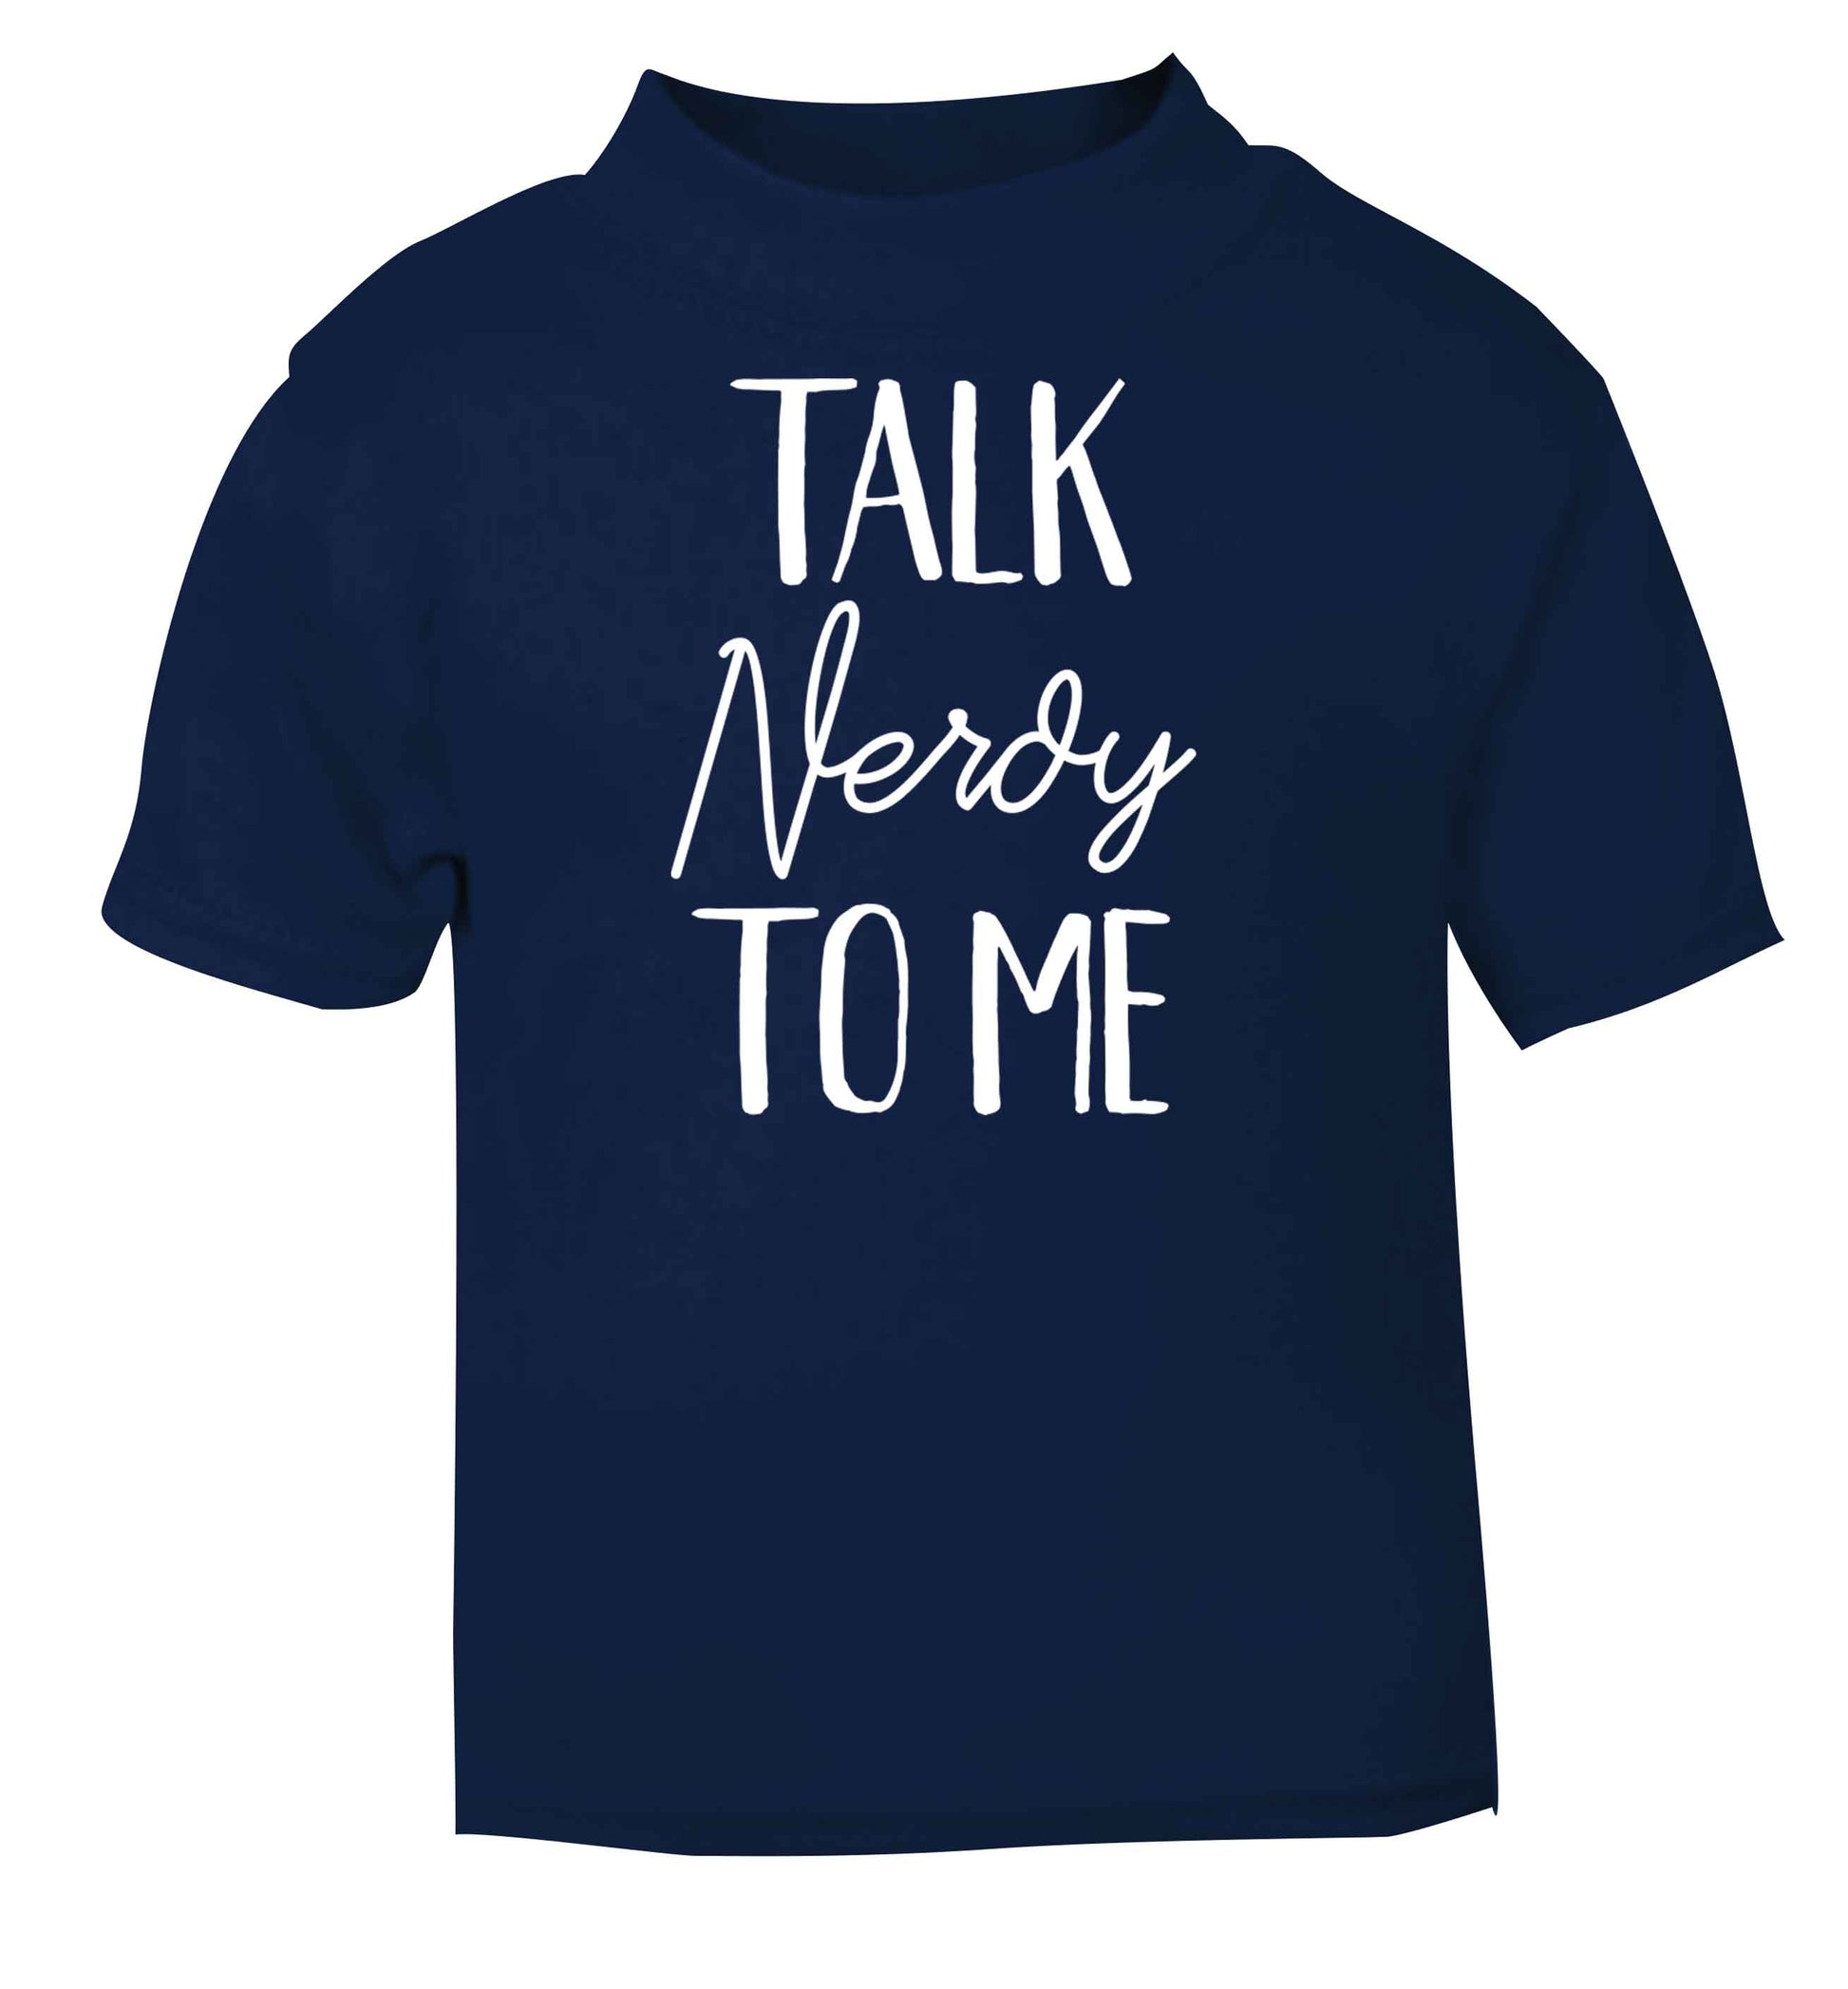 Talk nerdy to me navy baby toddler Tshirt 2 Years